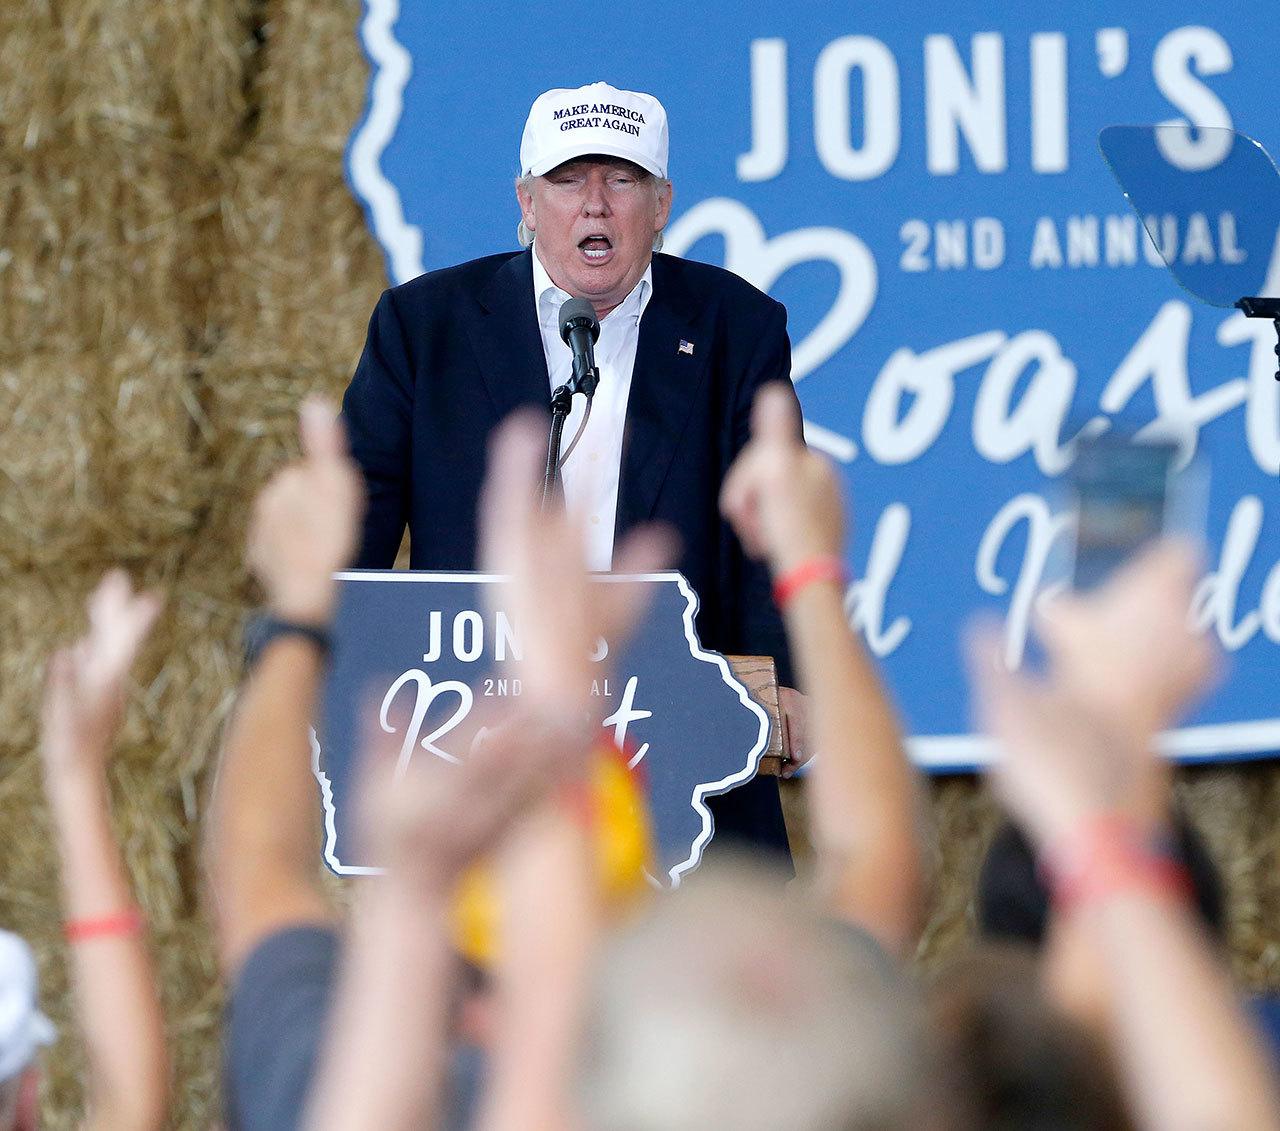 Republican presidential nominee Donald Trump speaks during a fundraiser at the Iowa State Fairgrounds, in Des Moines, Iowa, on Saturday. (AP Photo/Gerald Herbert)